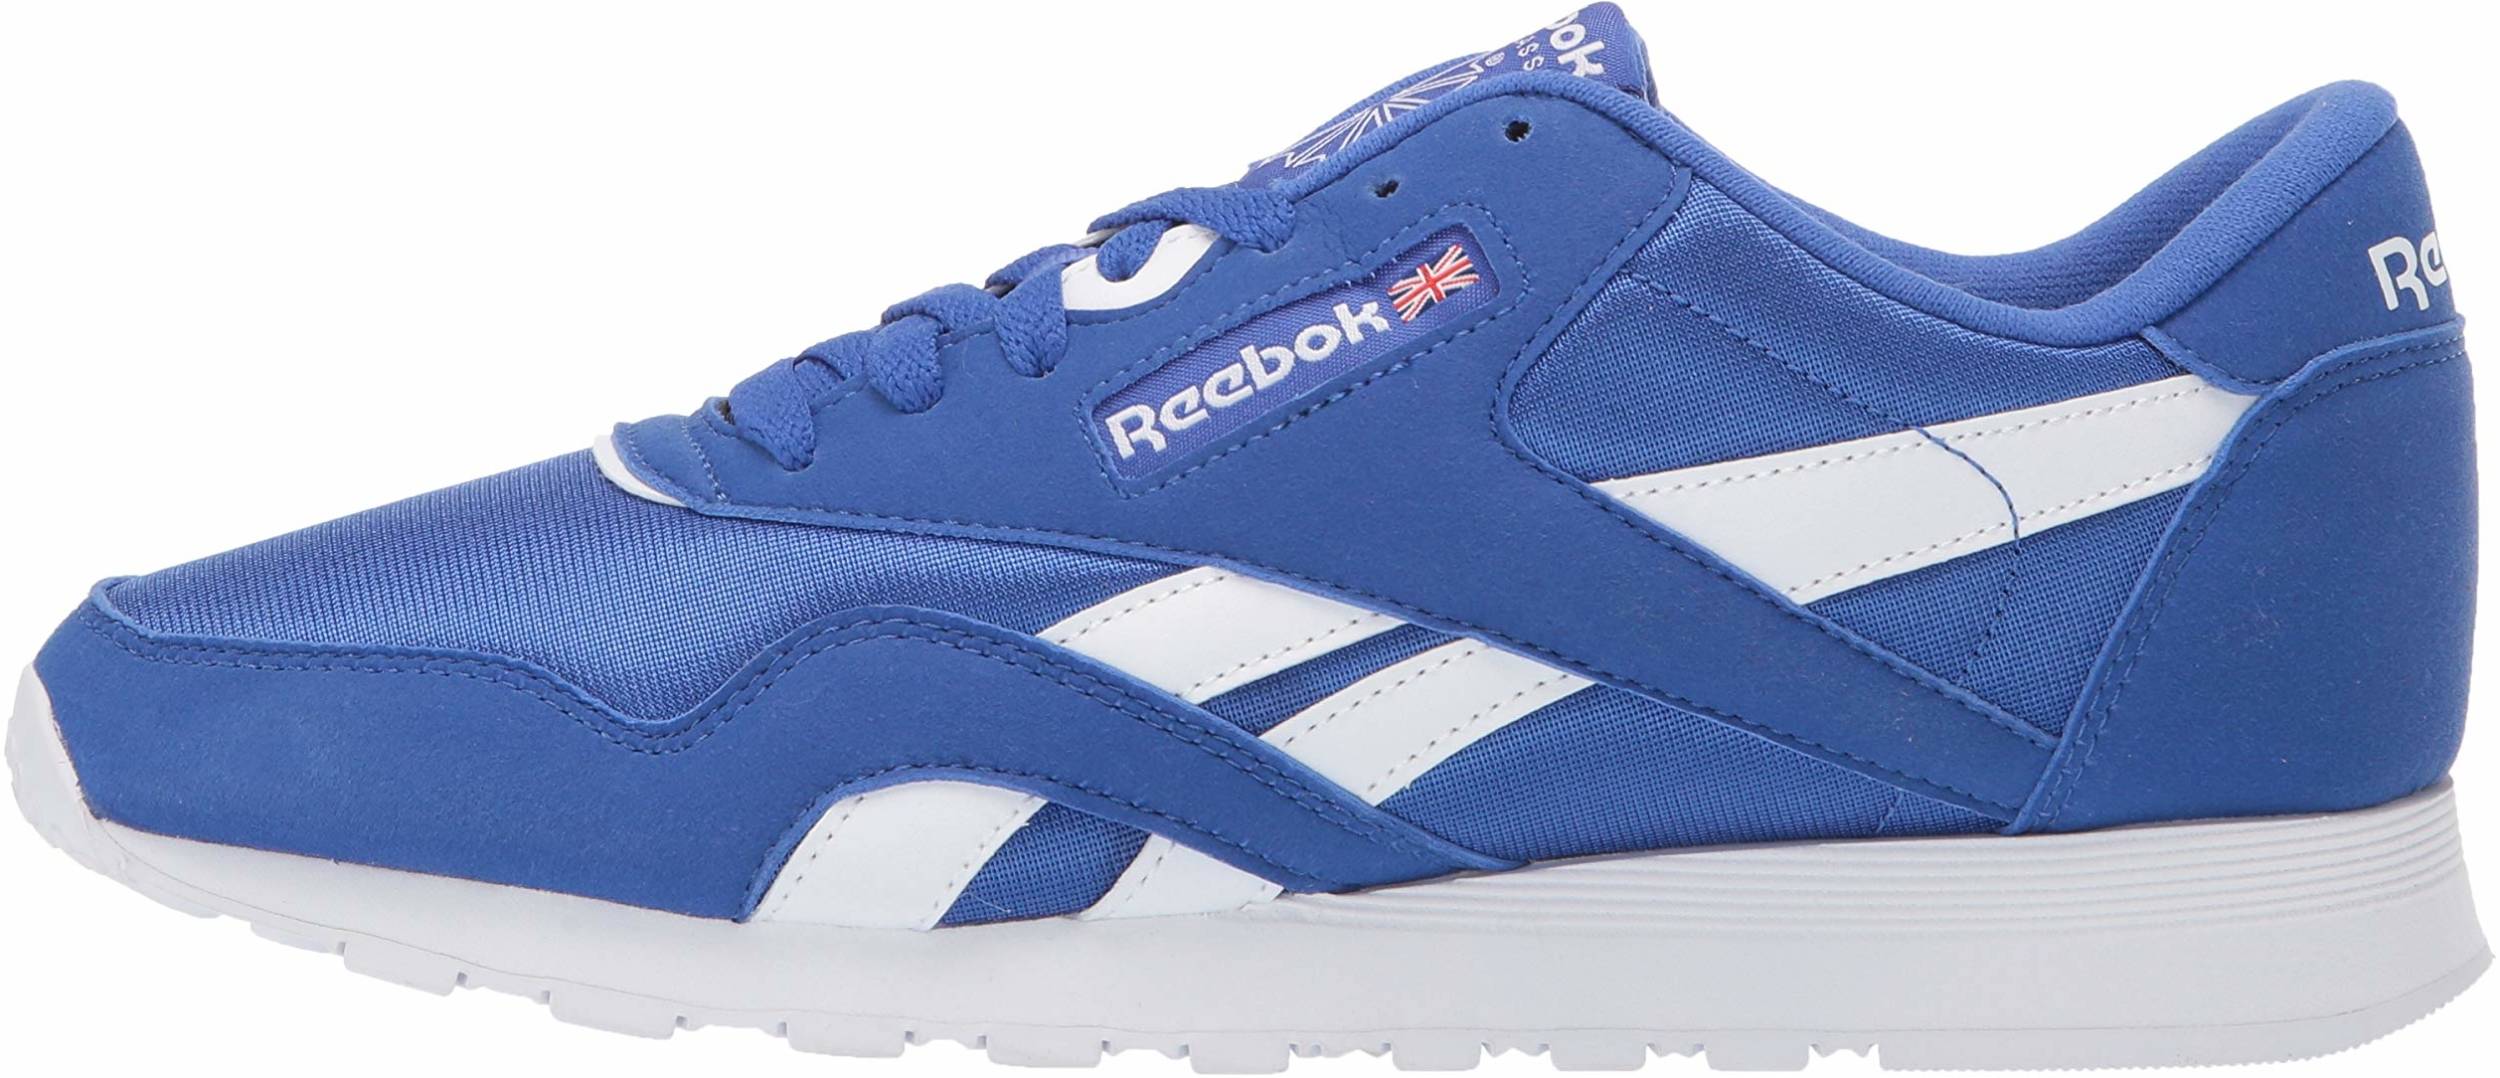 Only $40 + Review of Reebok Classic Nylon Color | RunRepeat